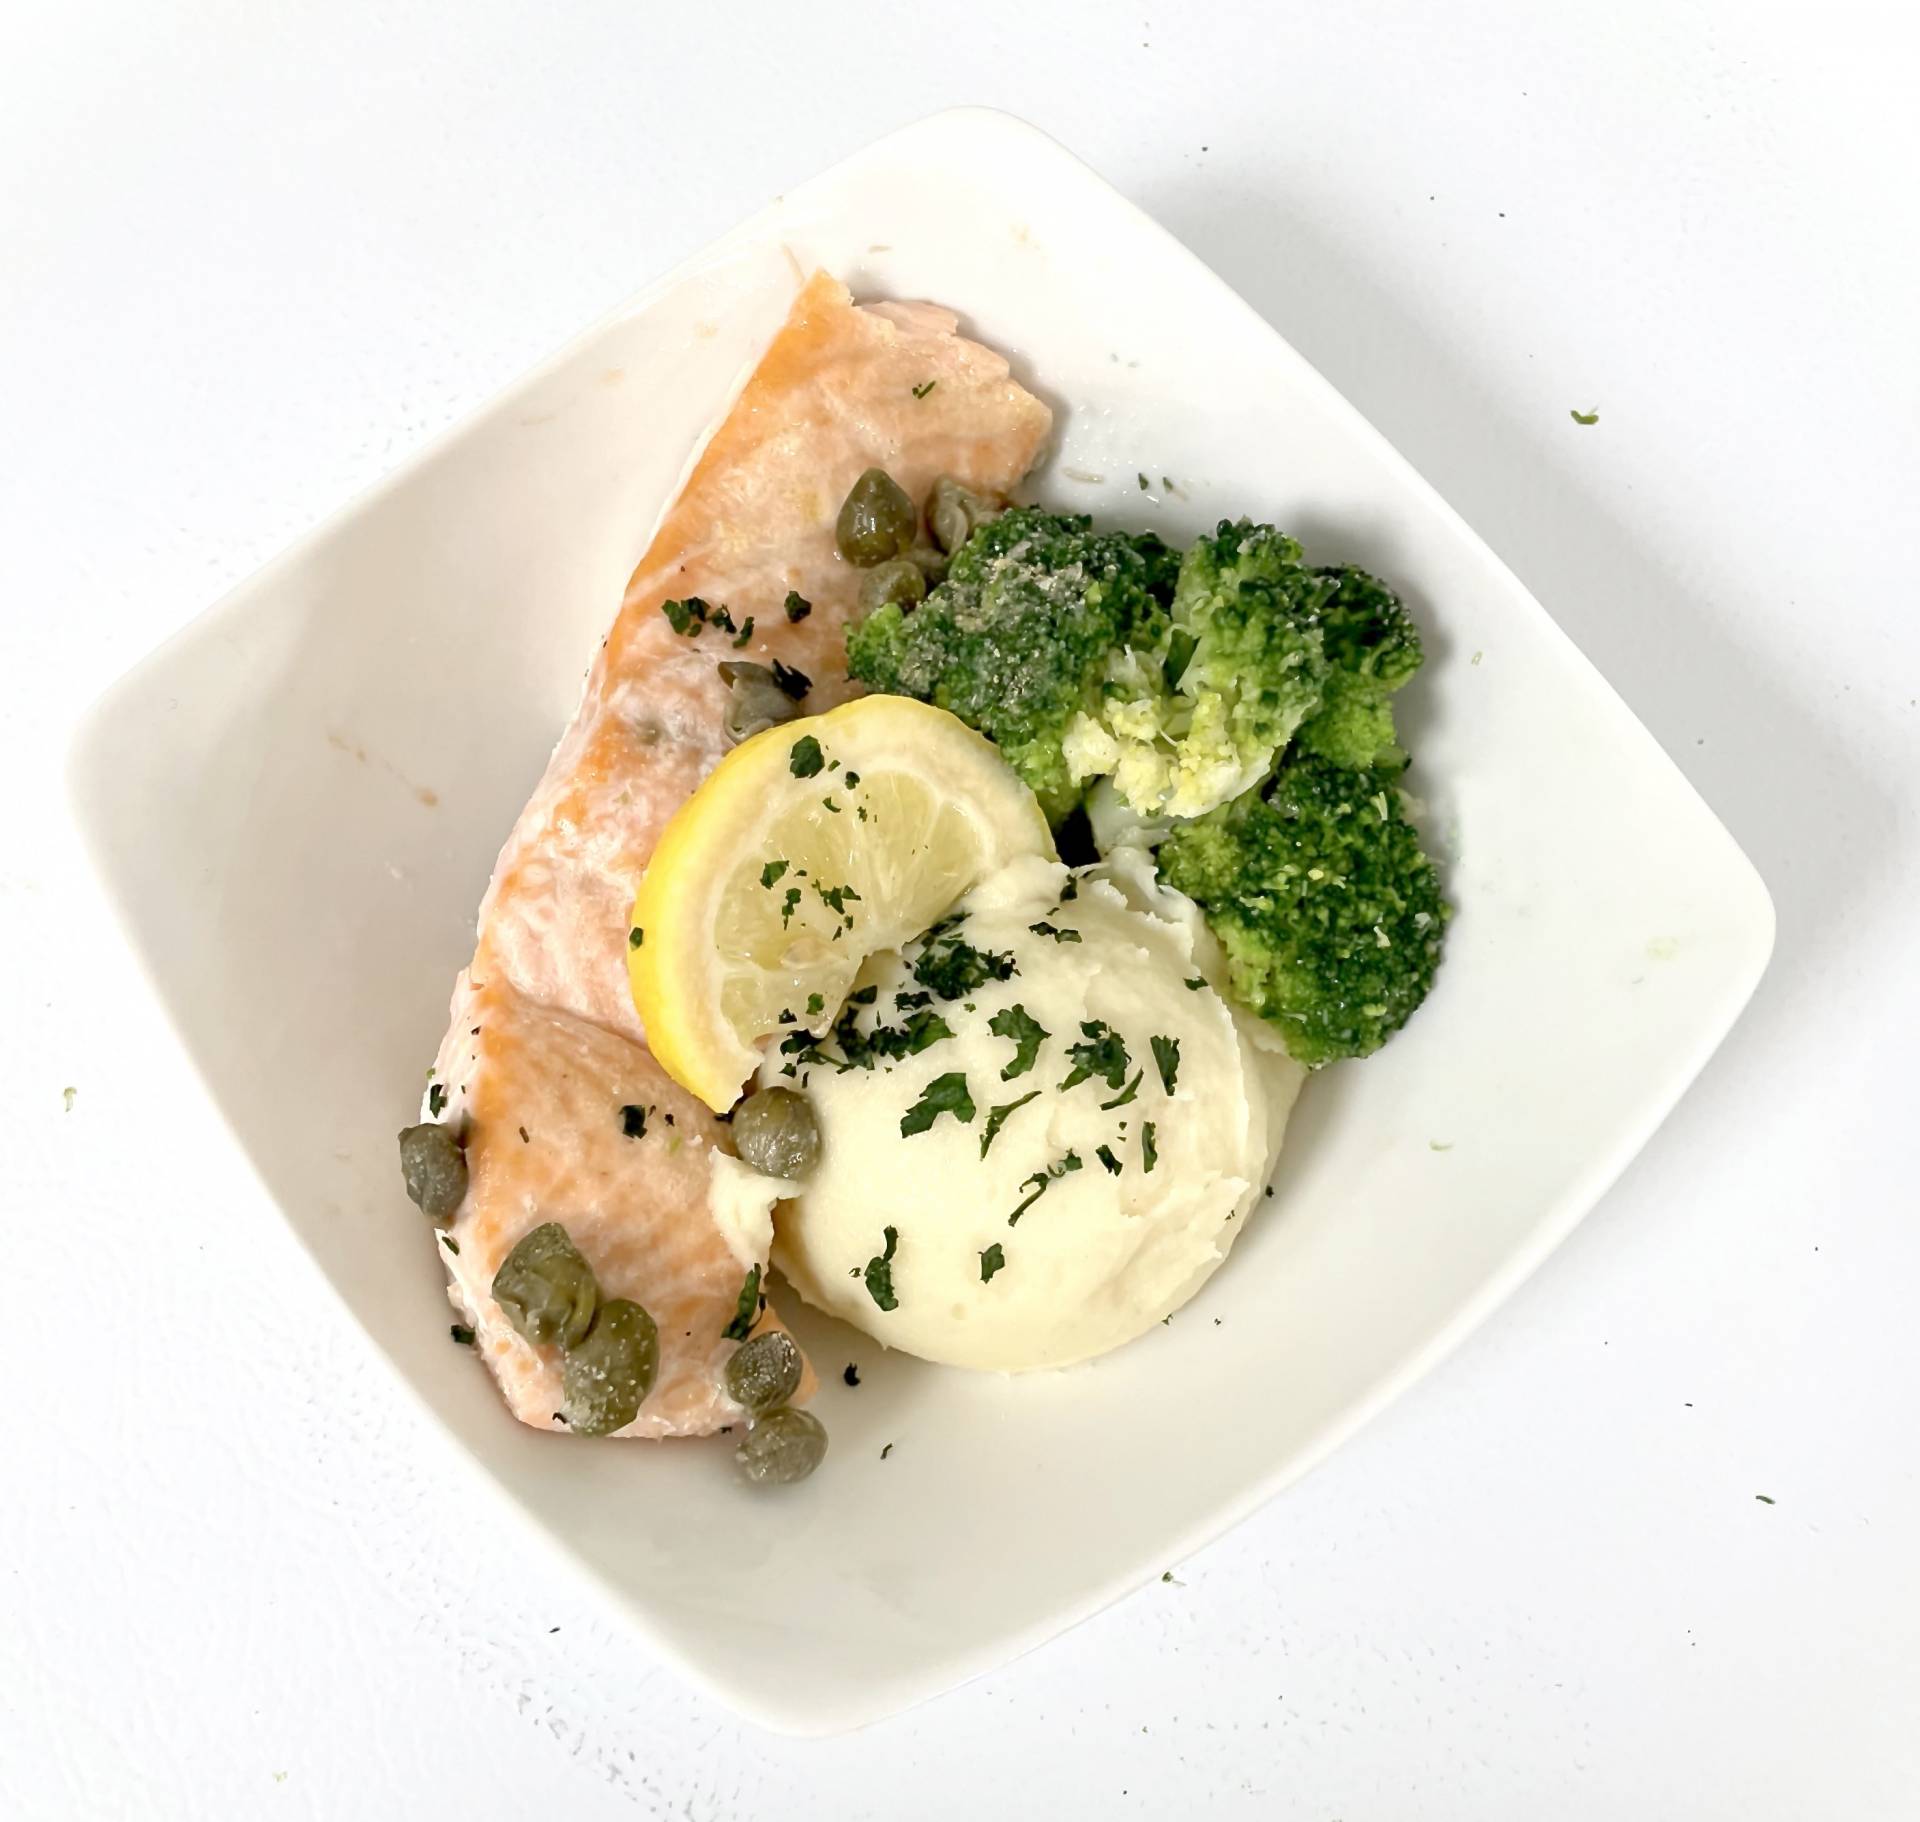 Baked Salmon with a Lemon Caper Butter Sauce and Cauliflower Mashed Potatoes - Low Fat